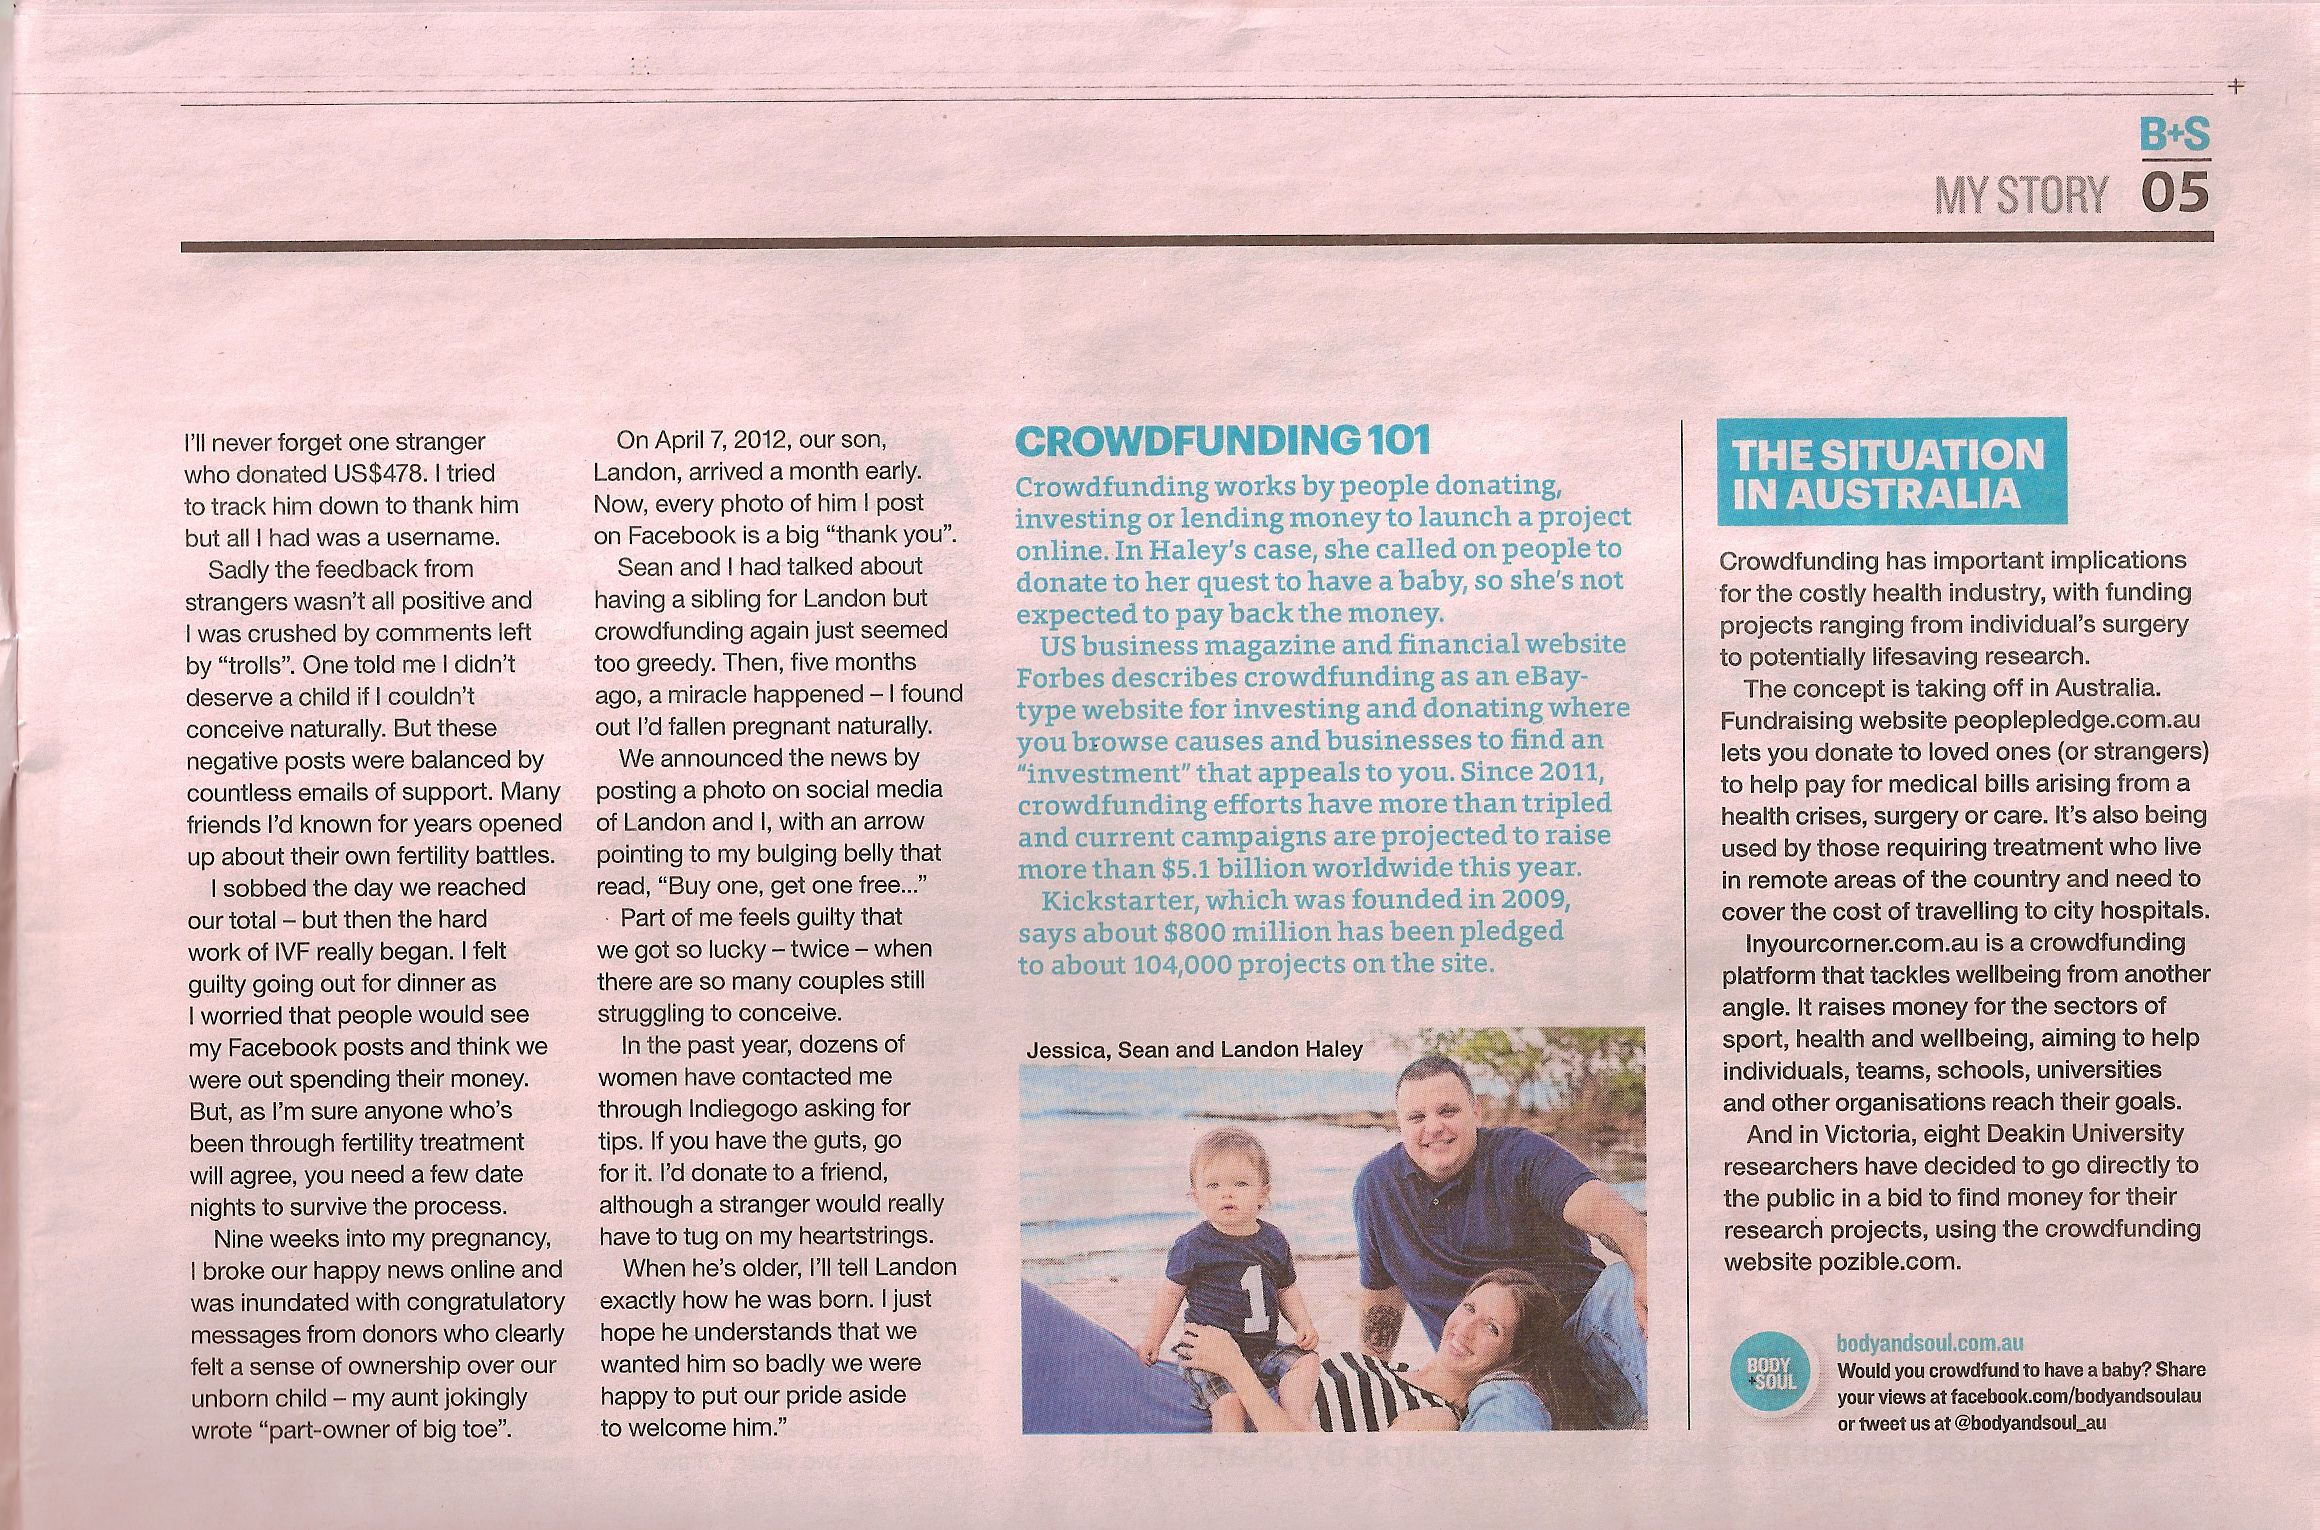 World’s First Crowdfunded IVF Baby- Article Seen in Body+Soul Australia (Sunday Telegraph)